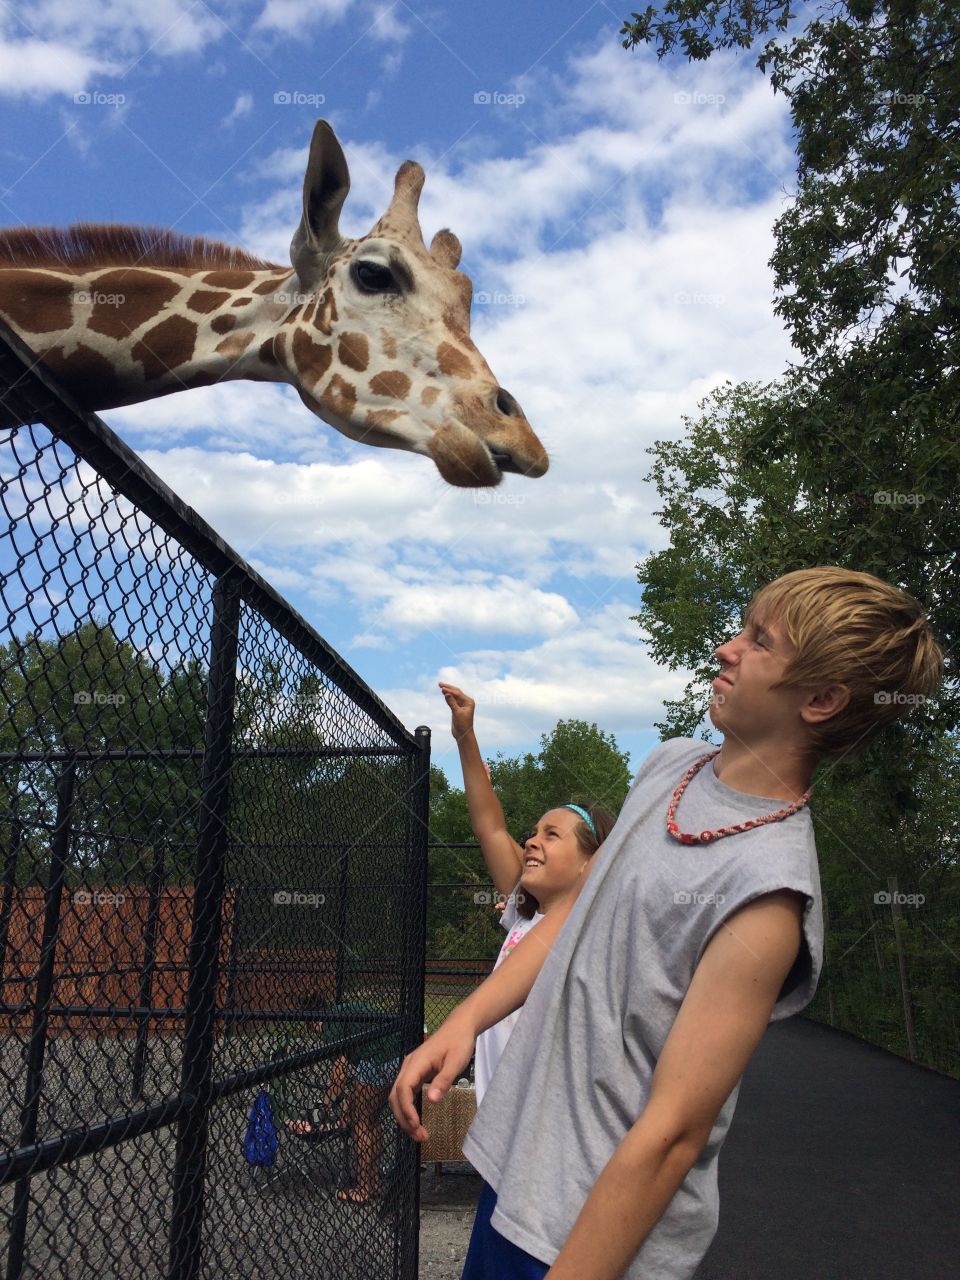 Teenage boy and girl standing in front of giraffe at zoo